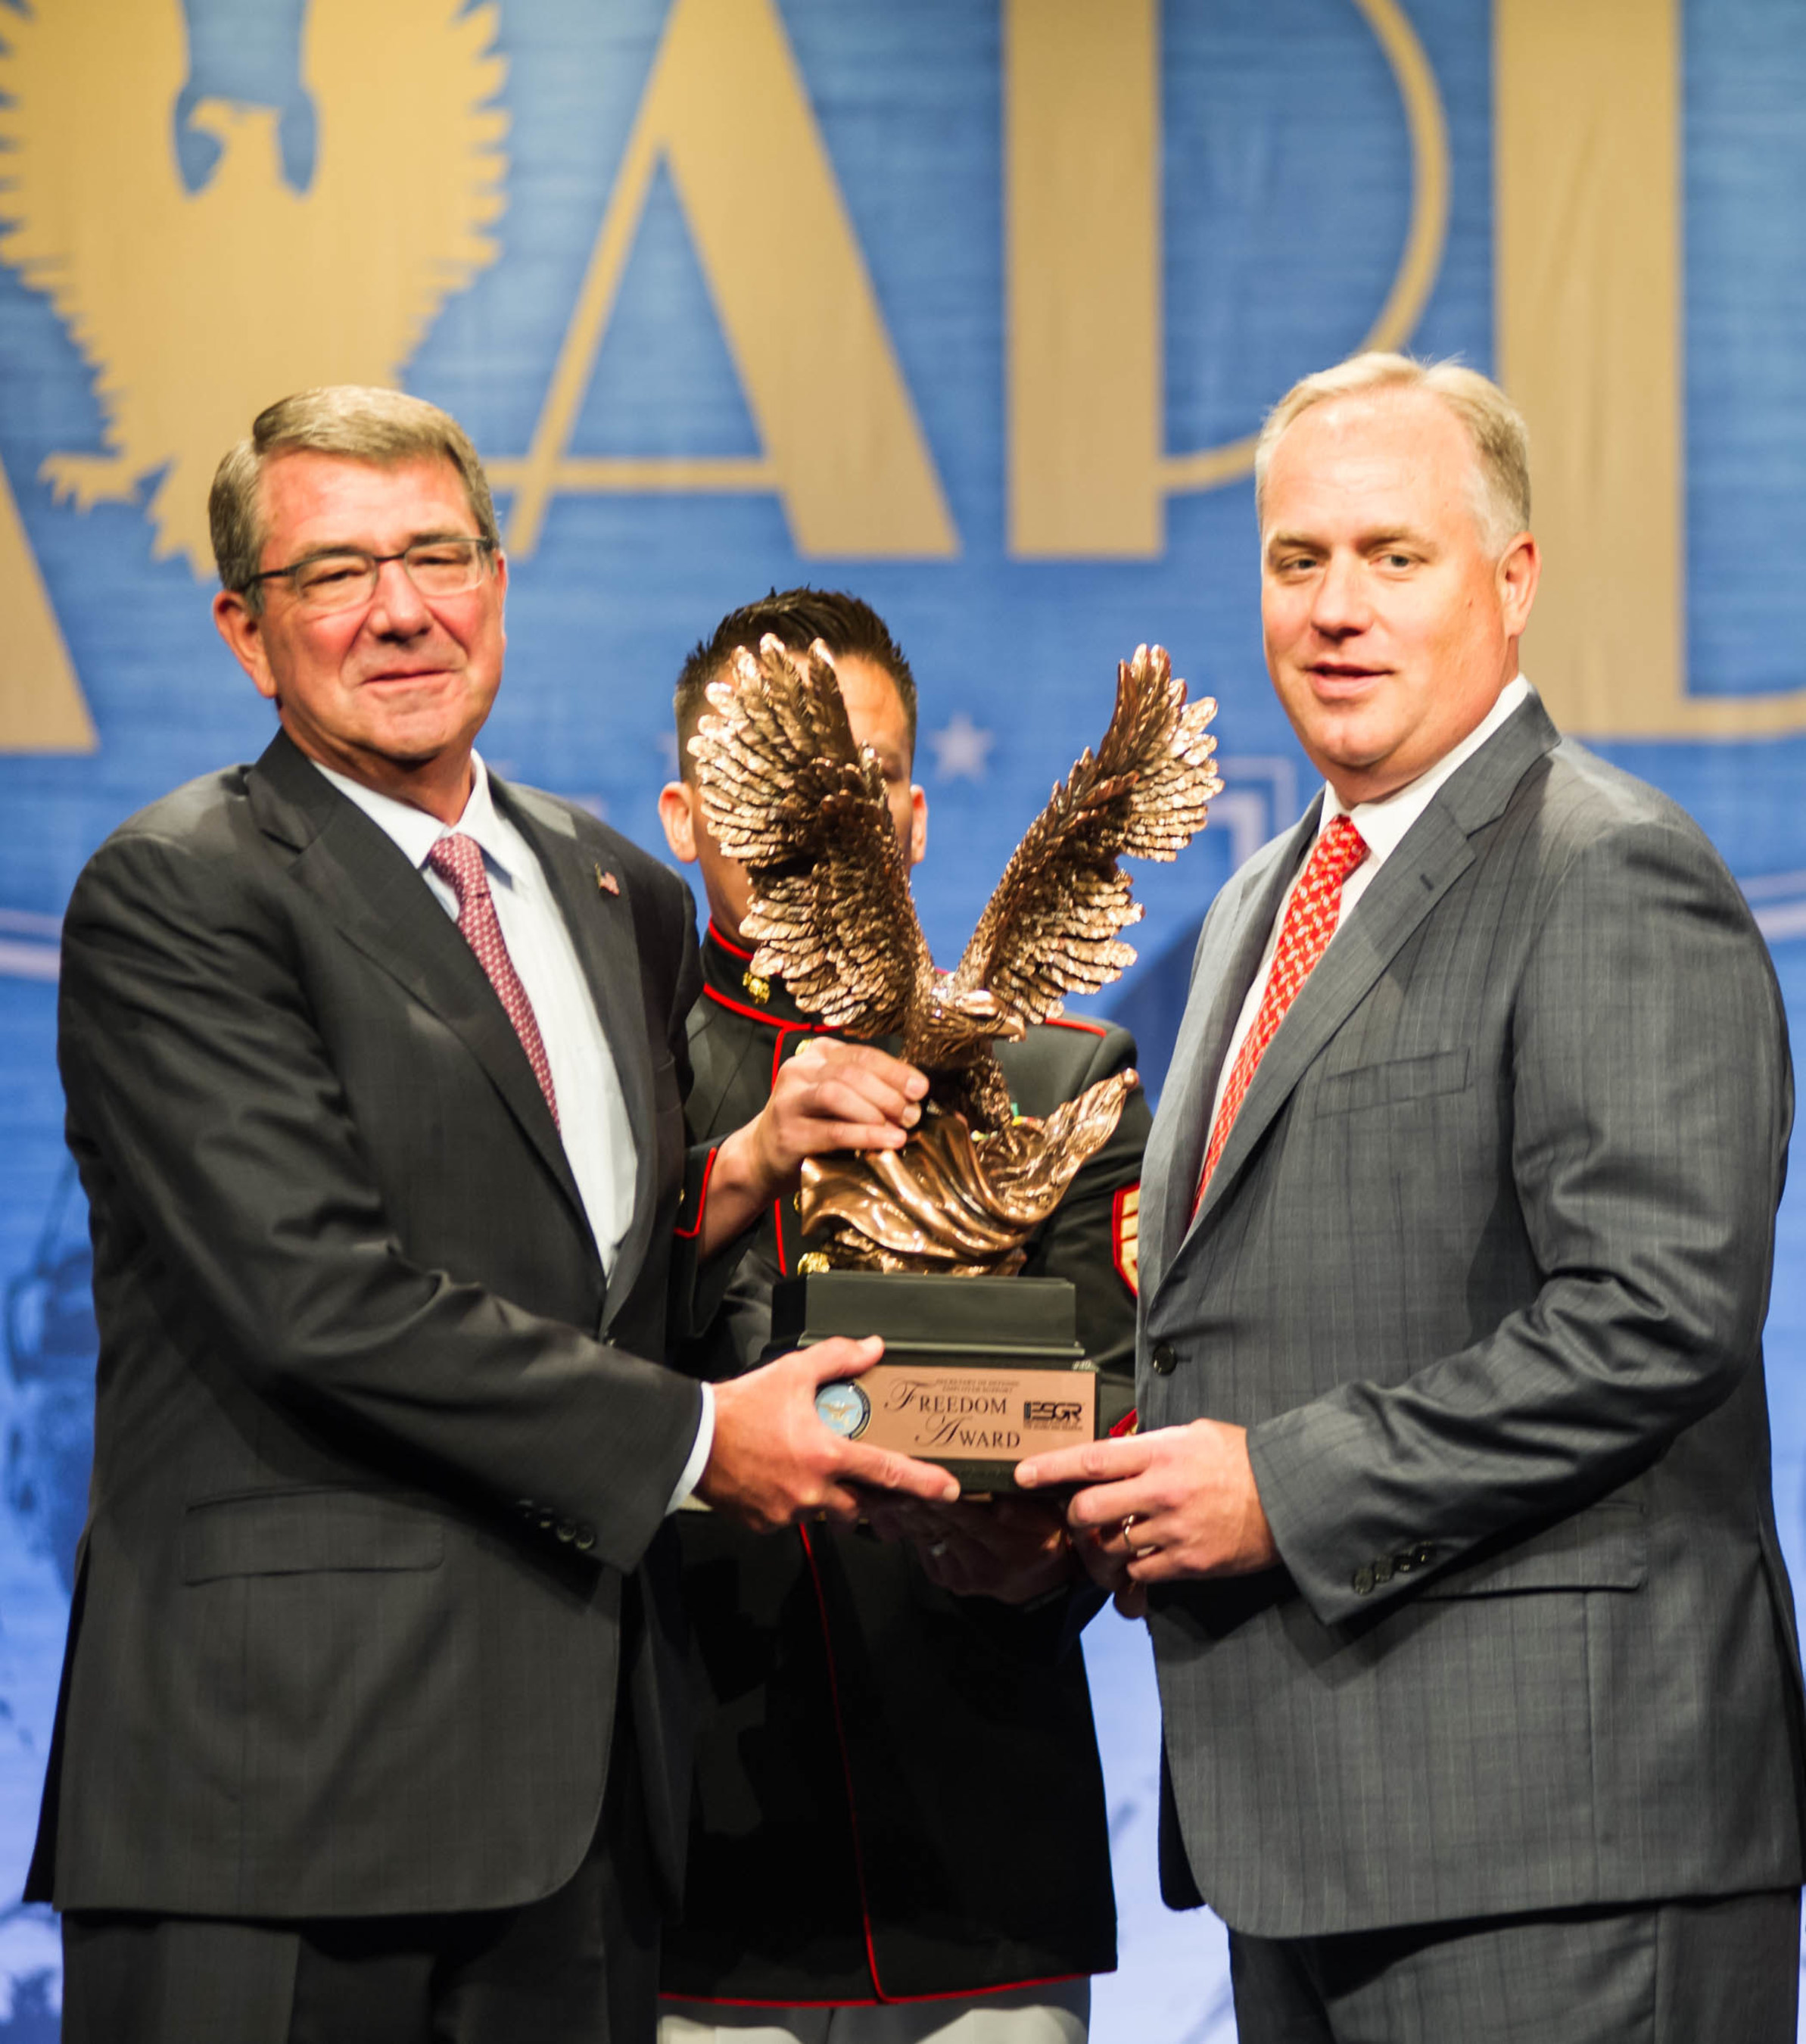 Secretary of Defense Ash Carter presented the Employer Support Freedom Award trophy to Steve McClellan, president of Goodyear Americas.